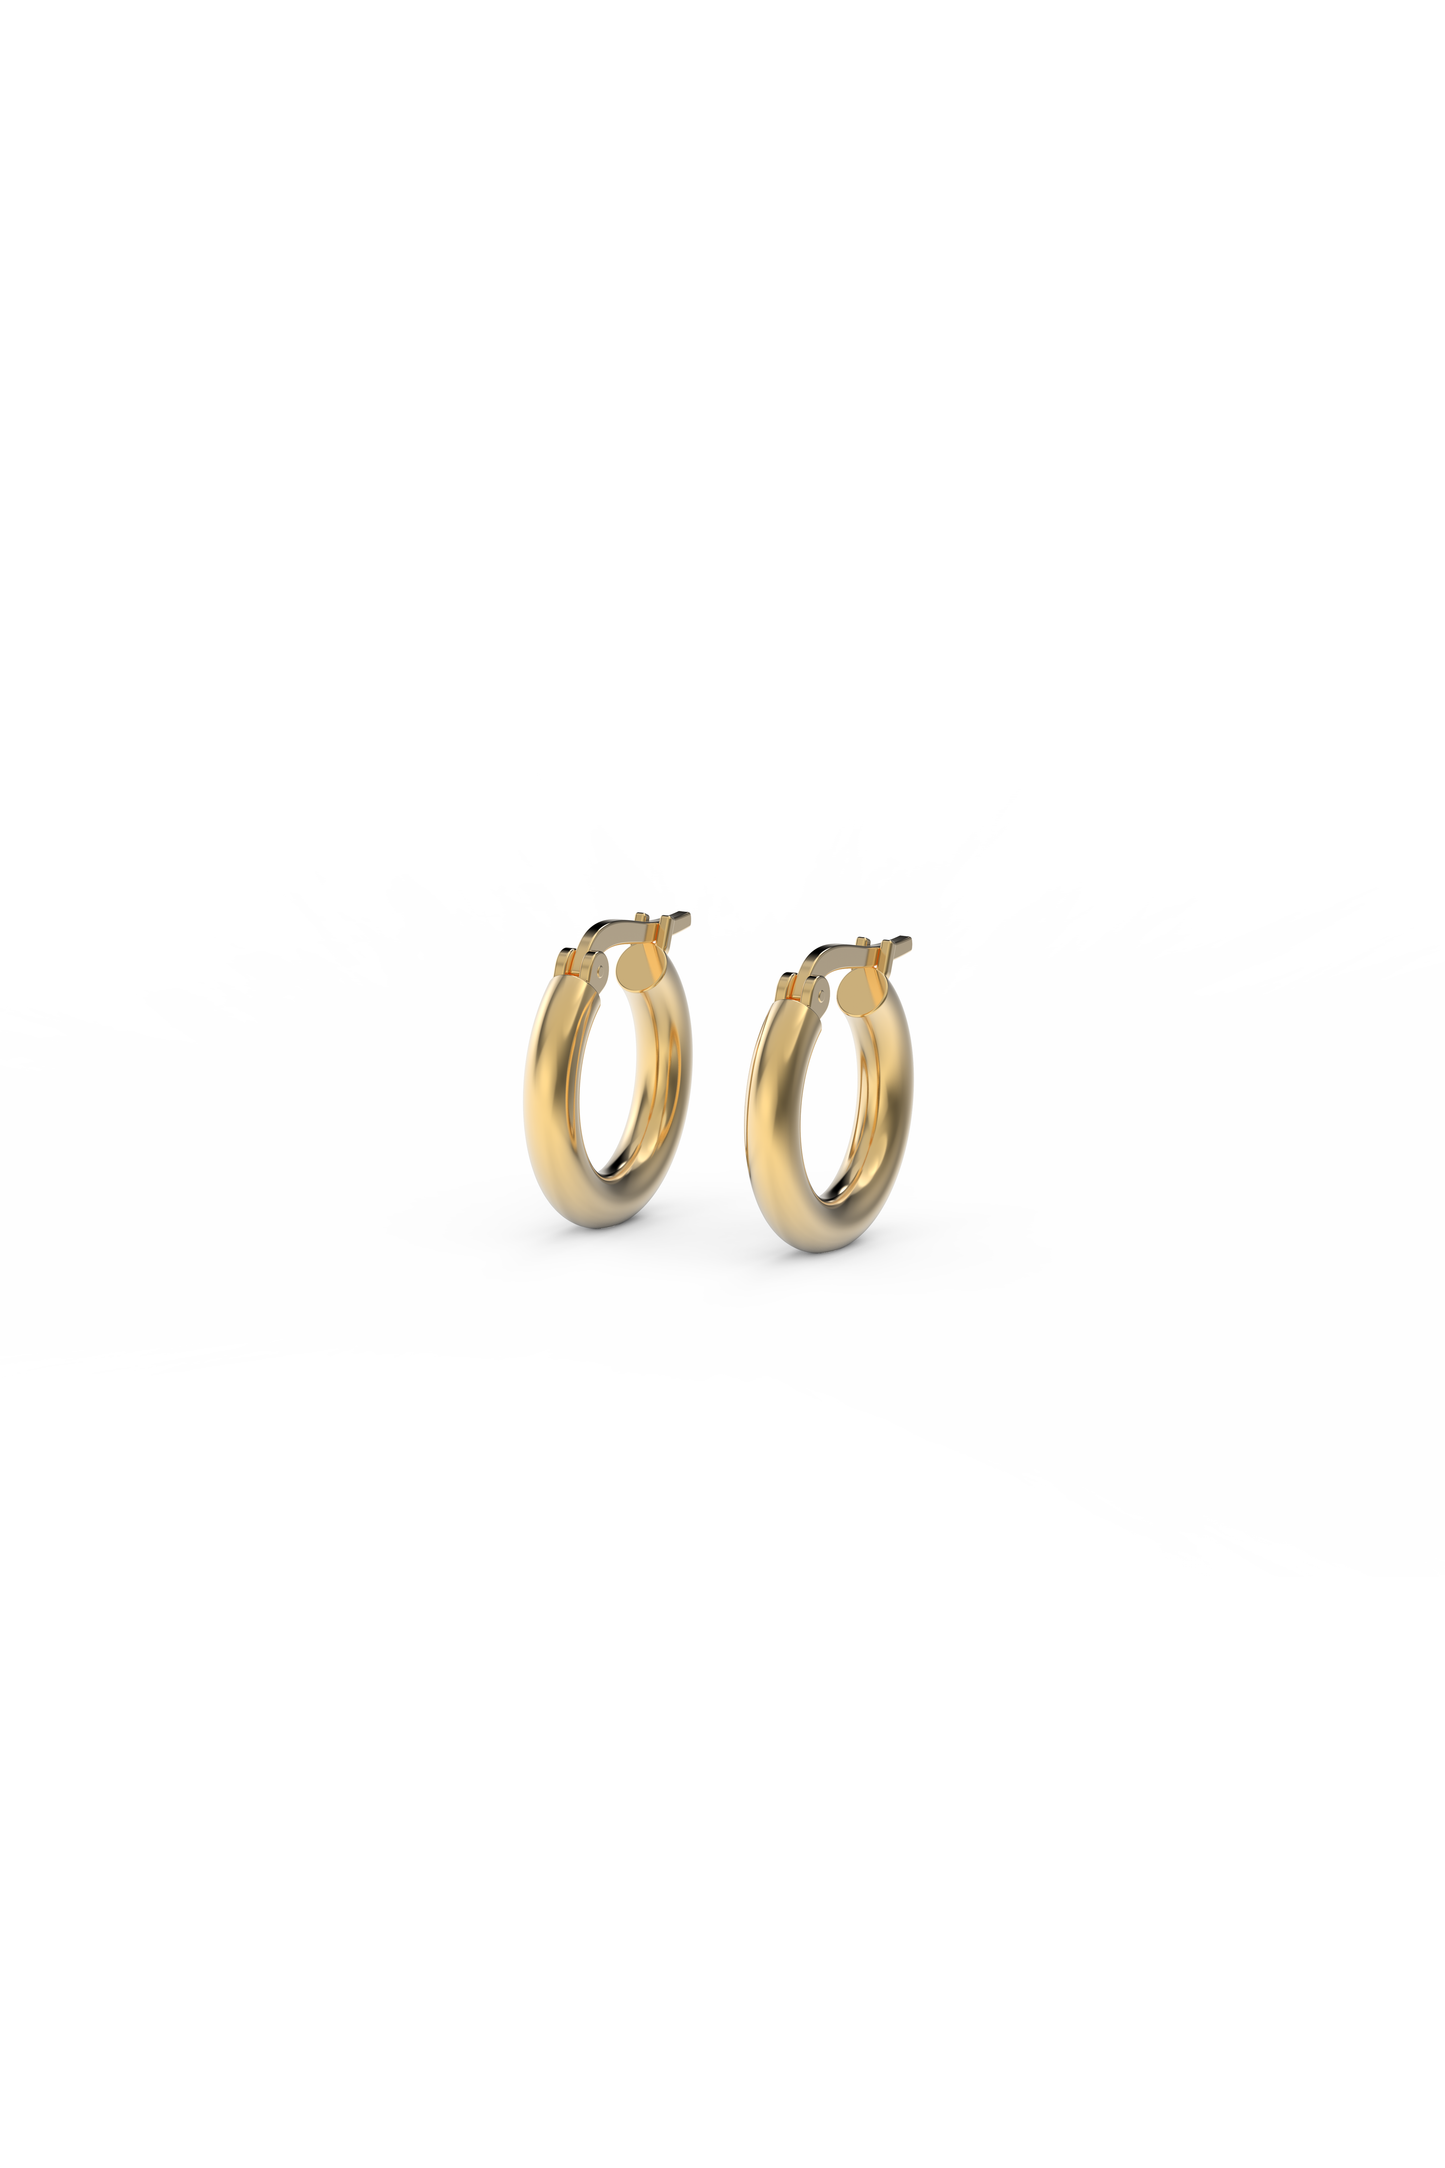 9ct Yellow gold hoops